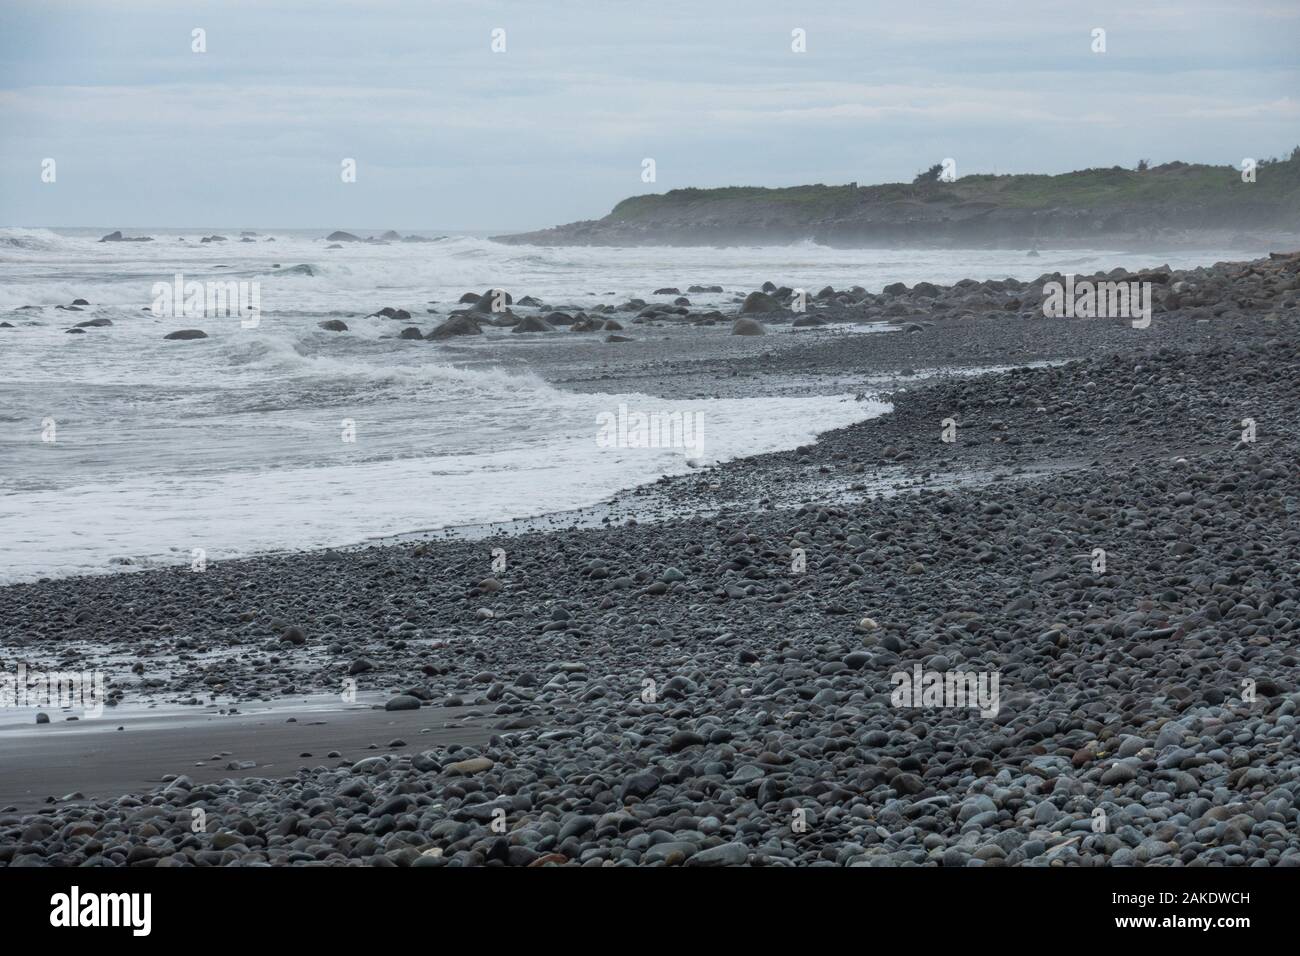 Strong waves break on the rocky shore of Dulan Beach, in southern Taiwan, after a cyclone passed by, washing ashore large pieces of driftwood Stock Photo